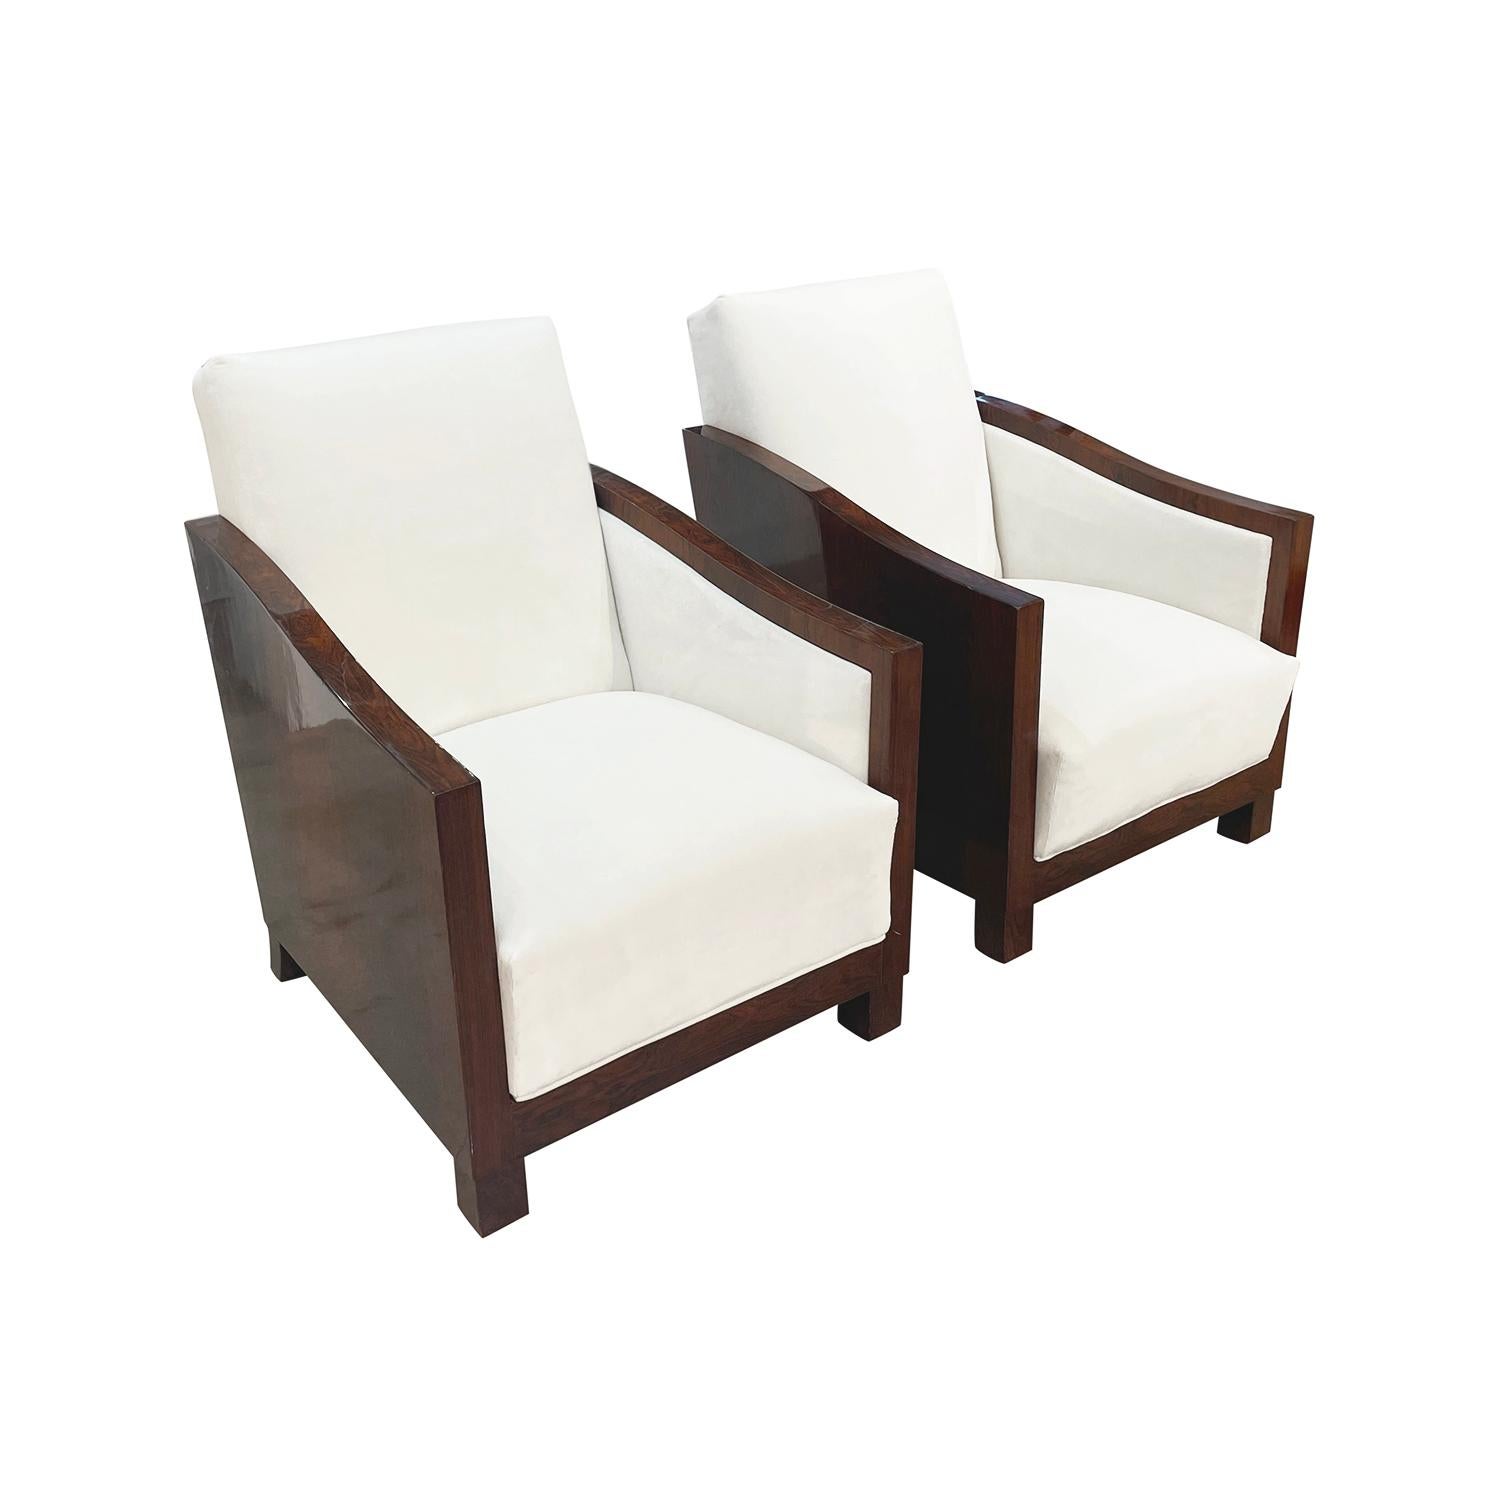 Veneer 20th Century French Art Deco Pair of Vintage Walnut Cocktail Club Chairs